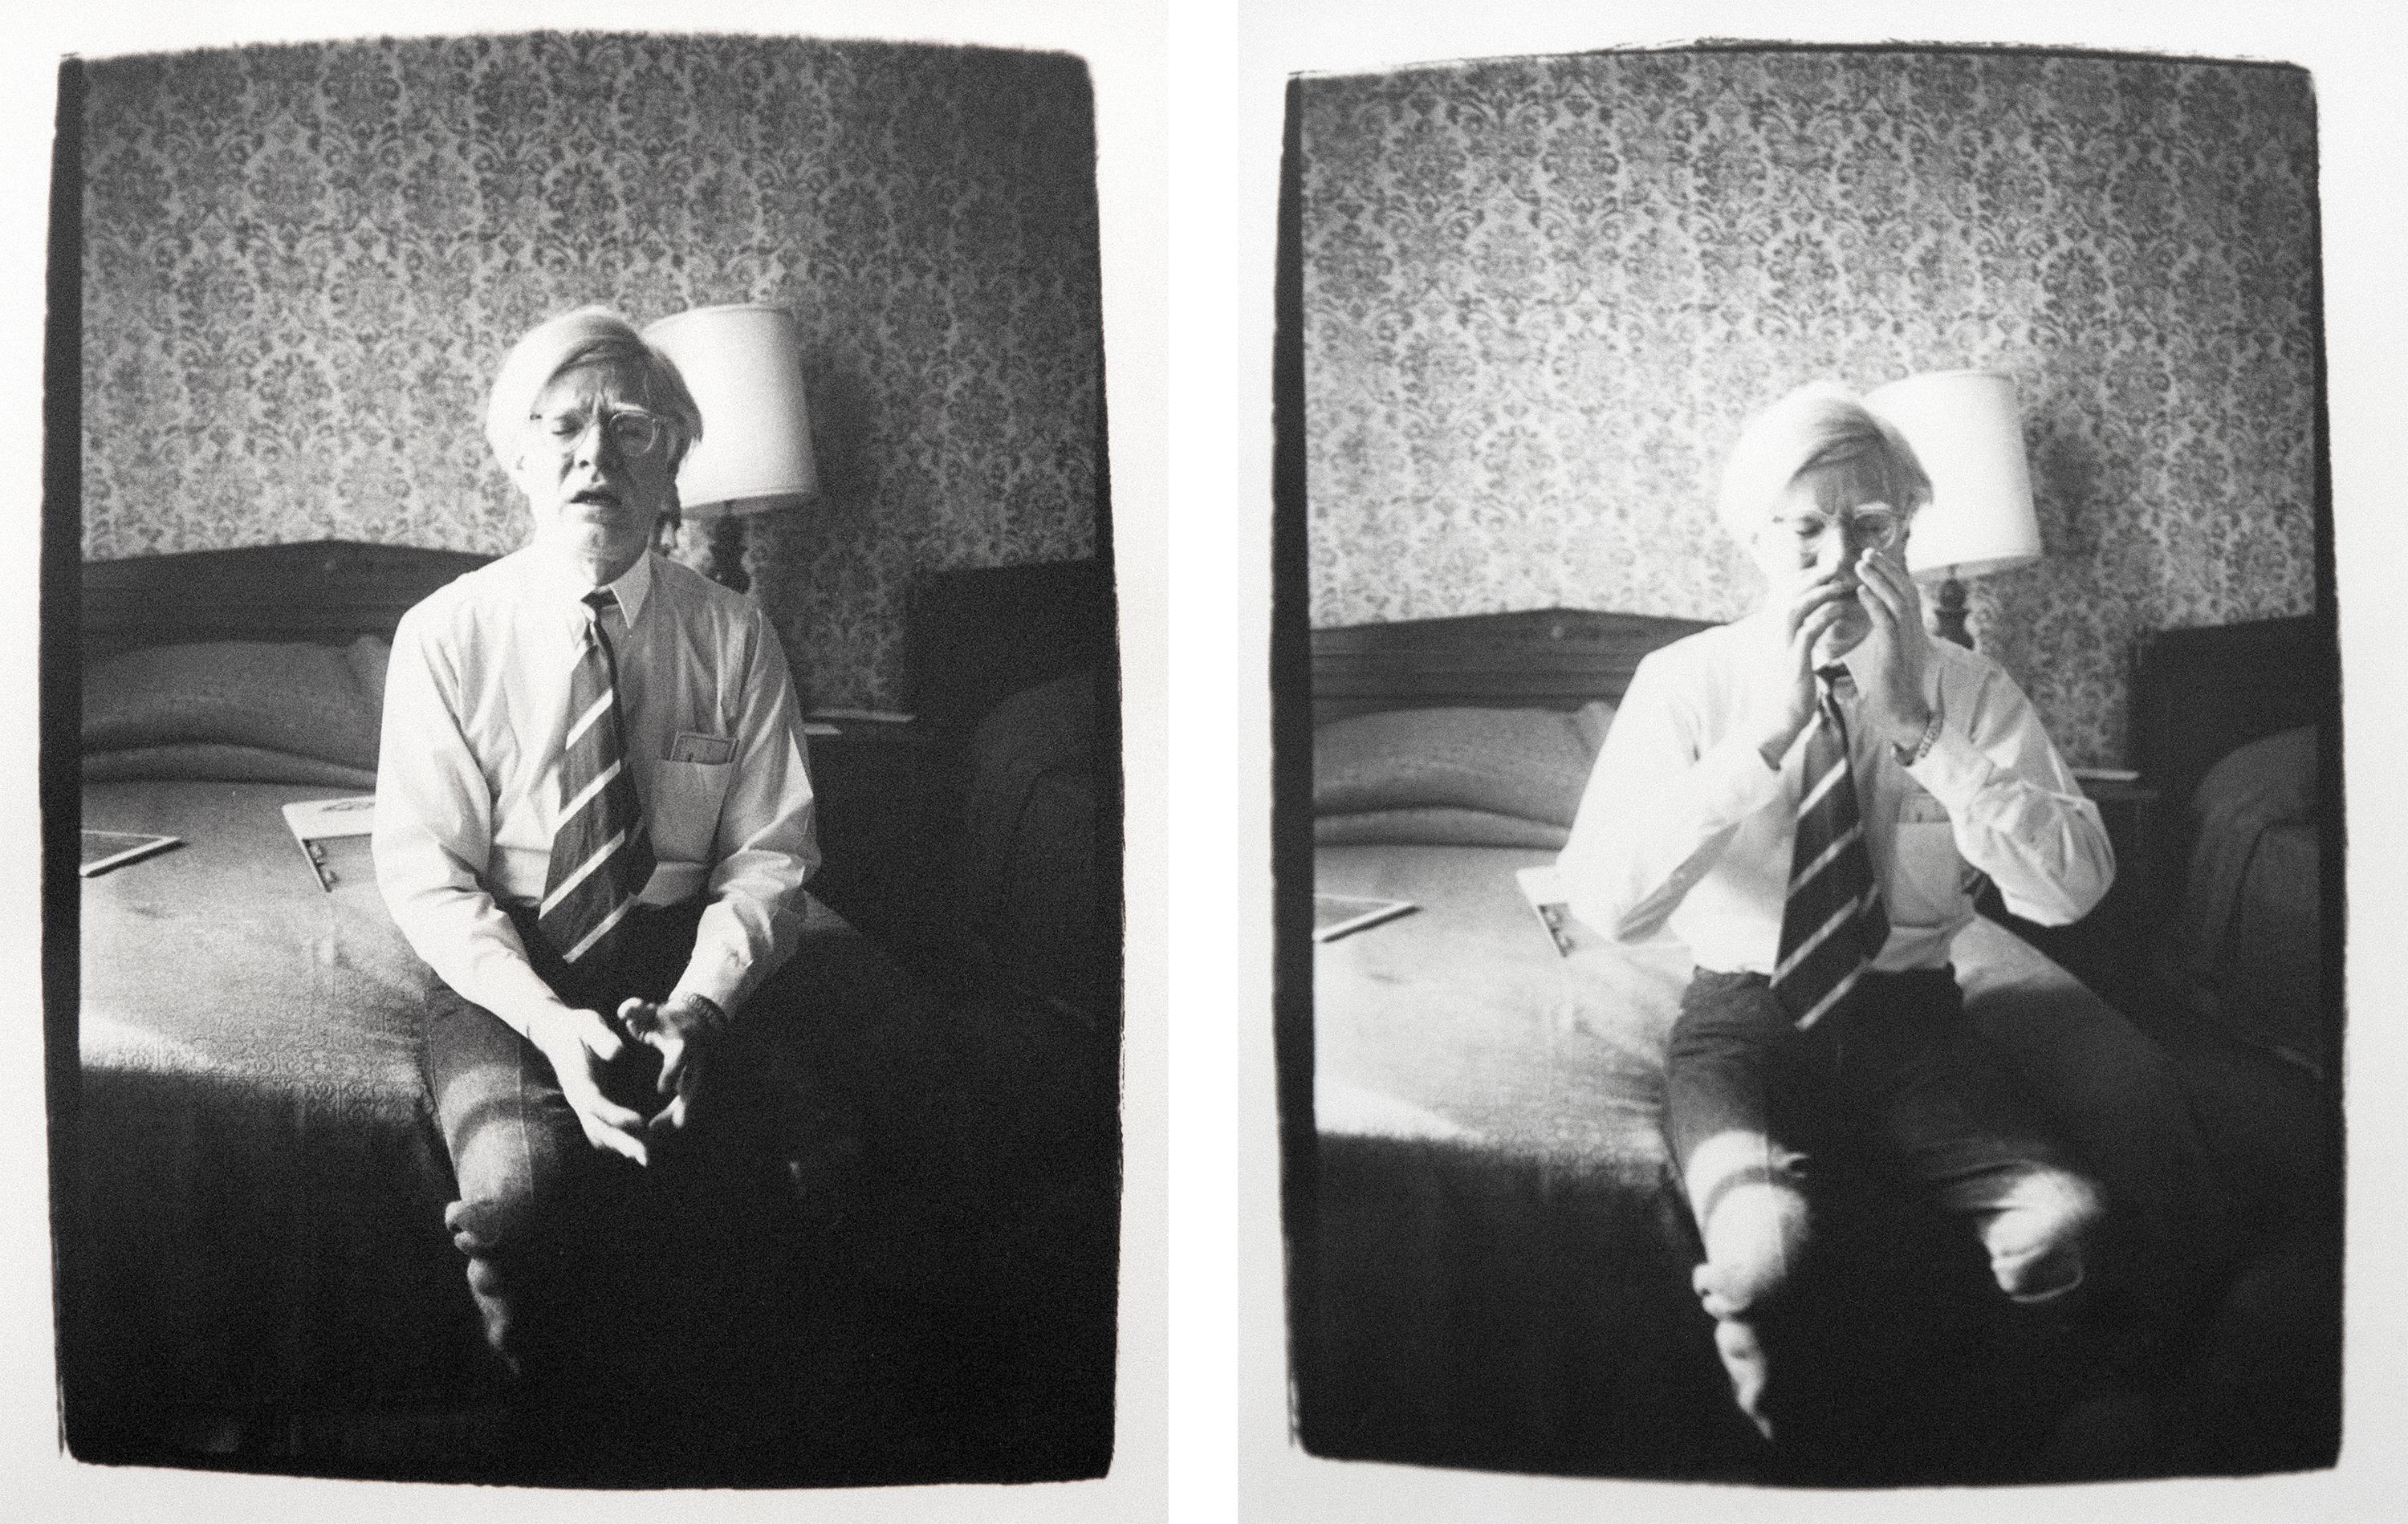 A set of two photographs by Andy Warhol. "Andy Warhol" is a set of two gelatin silver prints by American pop artist Andy Warhol. The artwork is numbered FL01.00020, FL01.00019, and AWL180. Each print measures 10 x 8 in. and they are framed